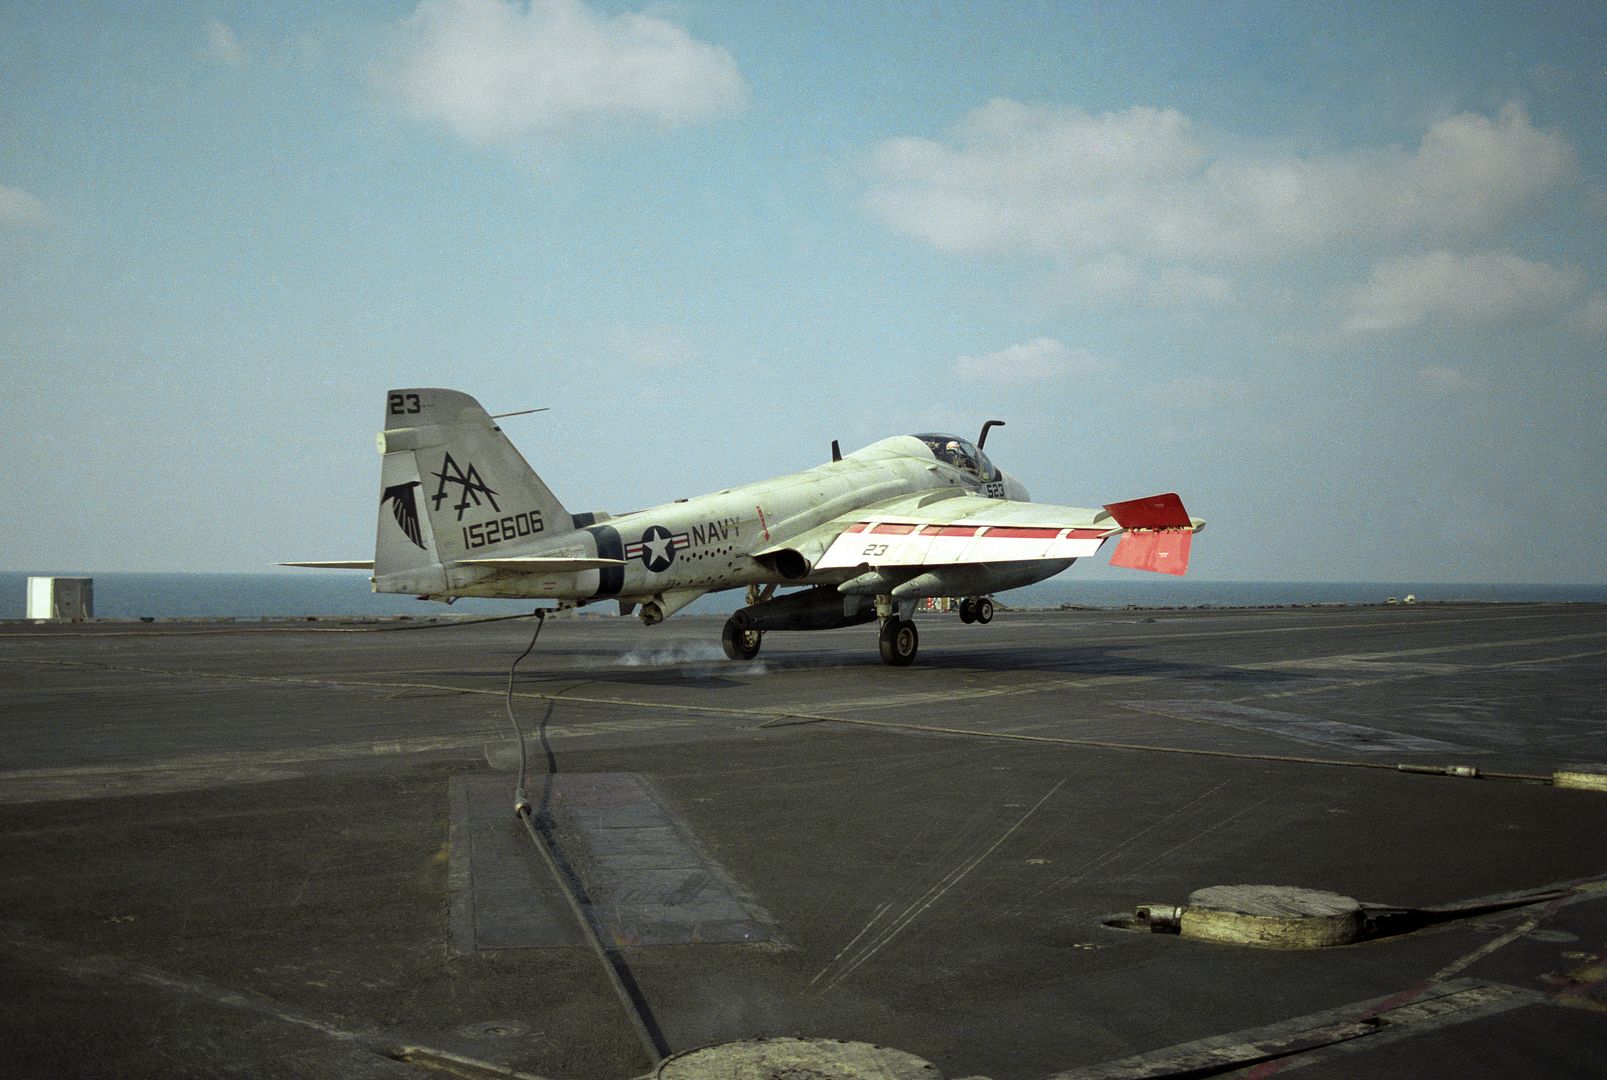 An A 6E Intruder Aircraft Engages An Arresting Cable While Landing Aboard The Aircraft Carrier USS SARATOGA 